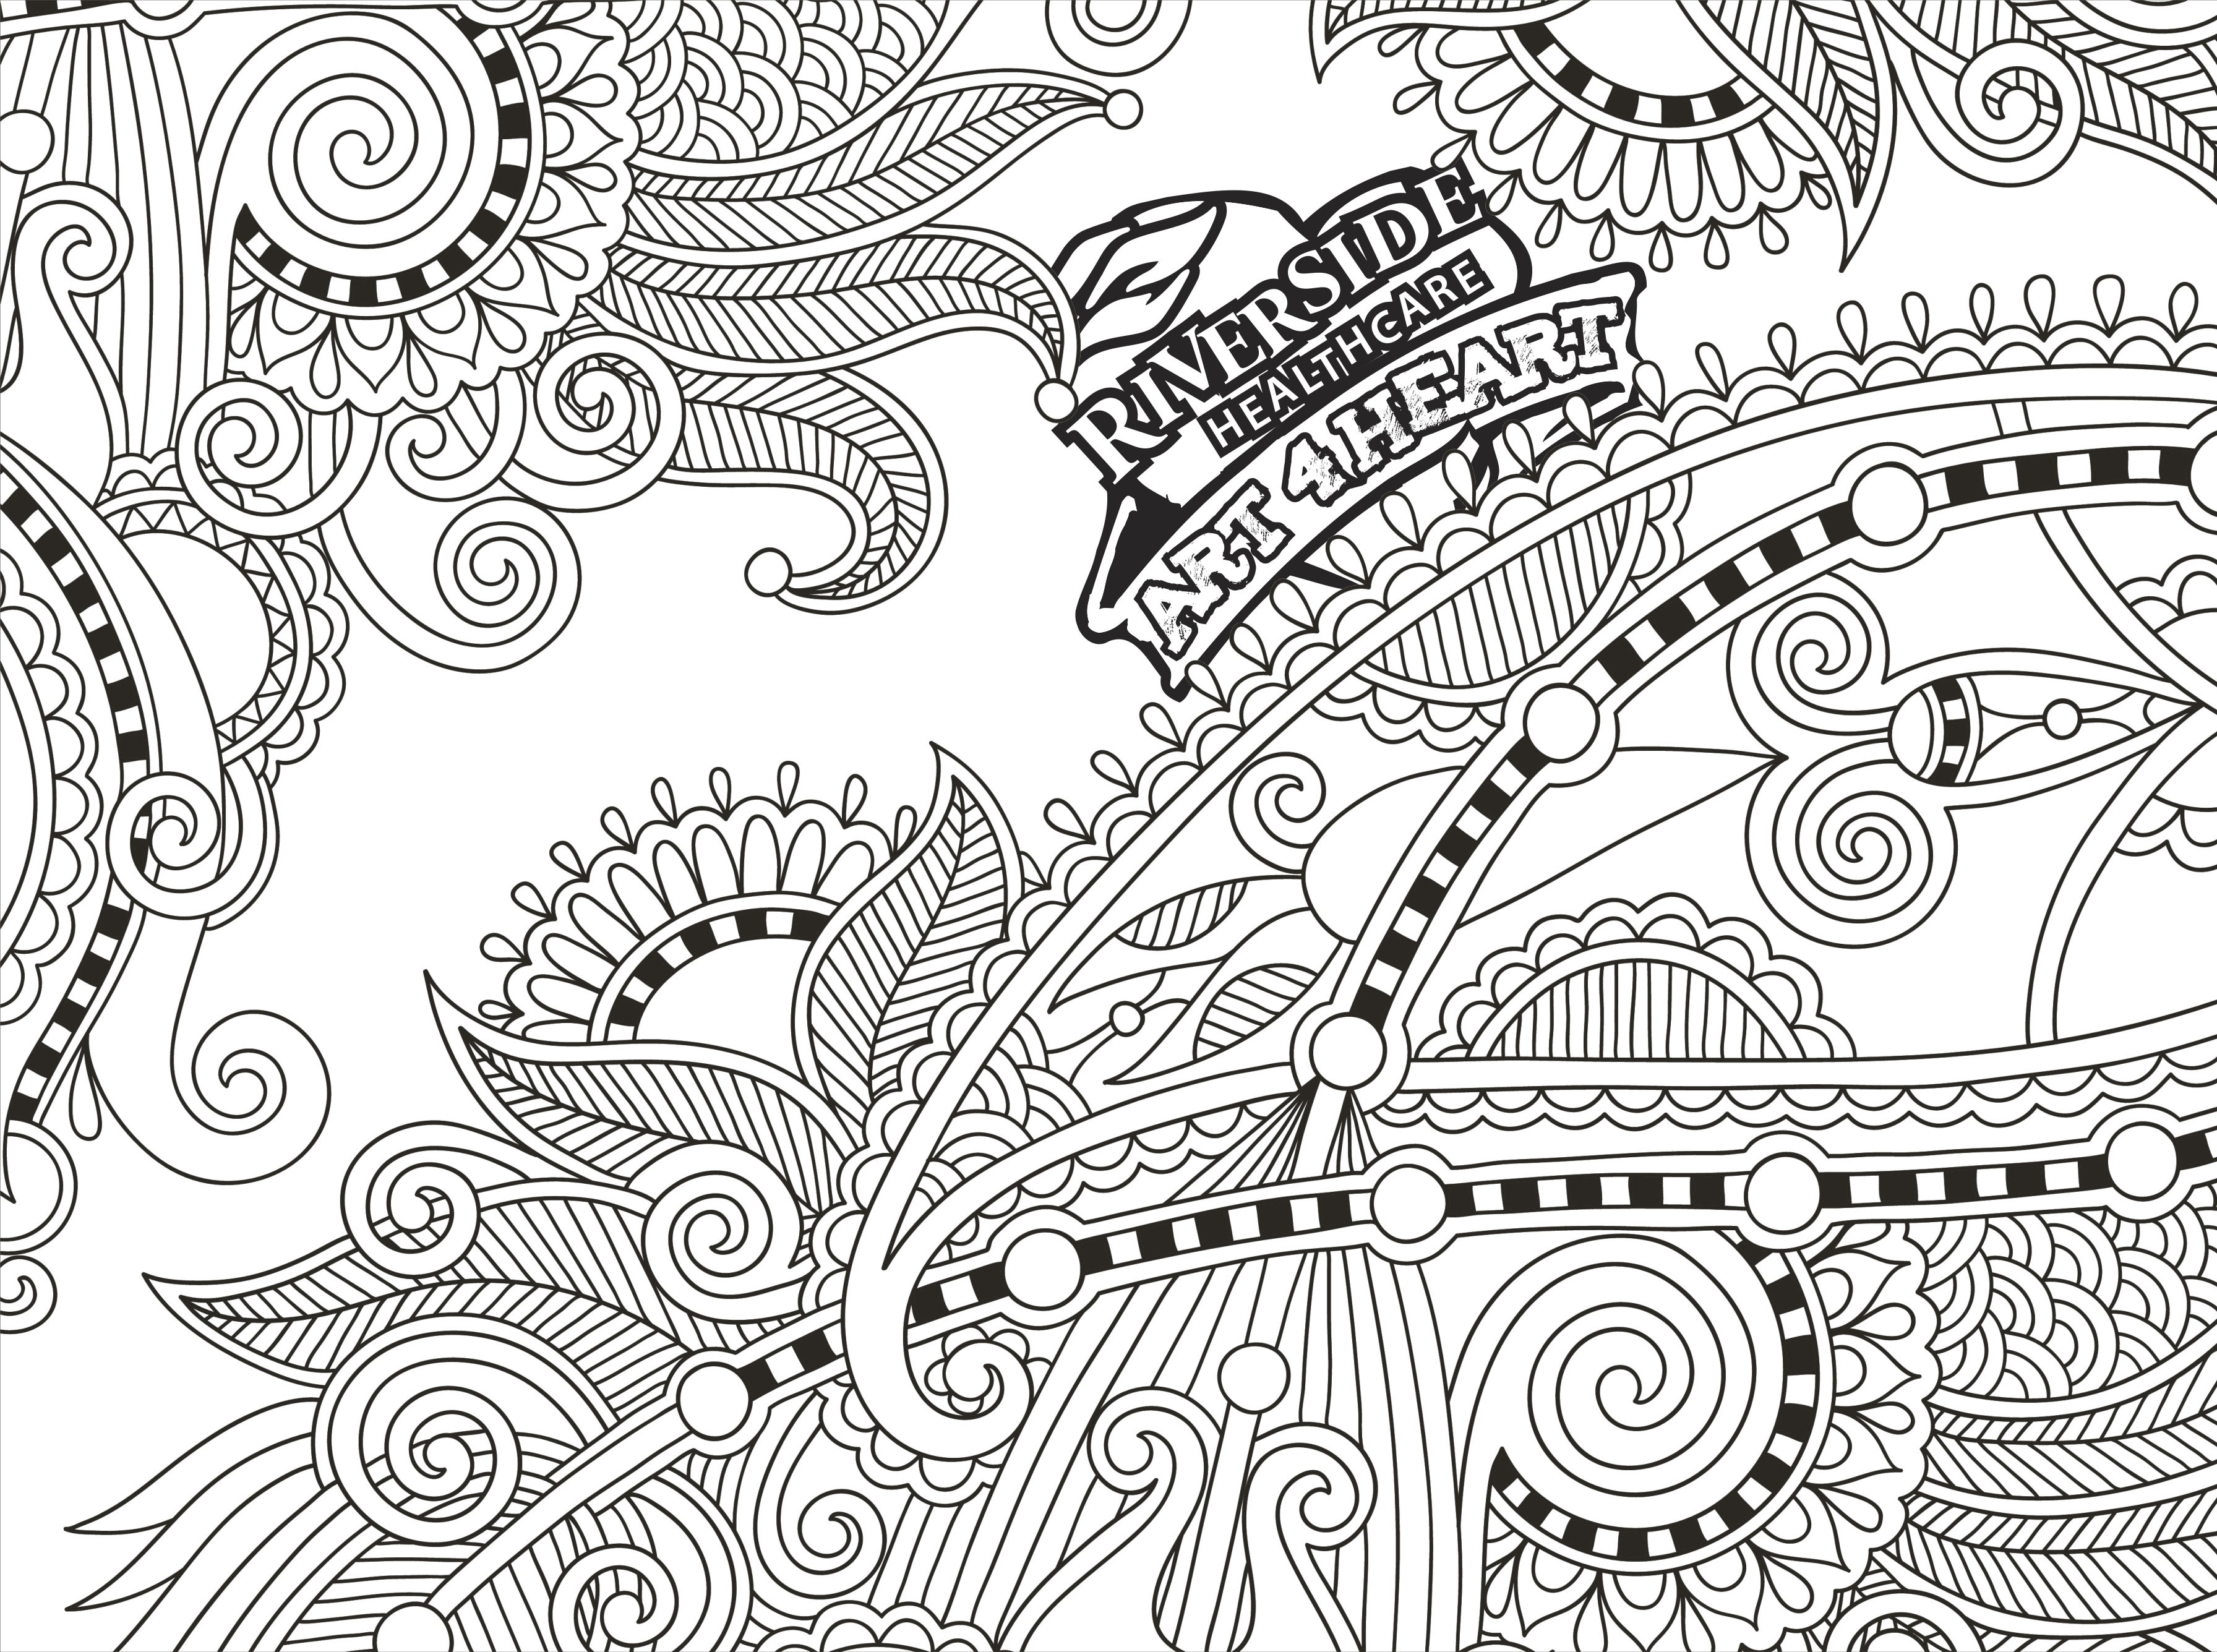 Coloring Ideas : Coloring Ideas Printable Pages Healthcurrents - Free Printable Coloring Book Pages For Adults